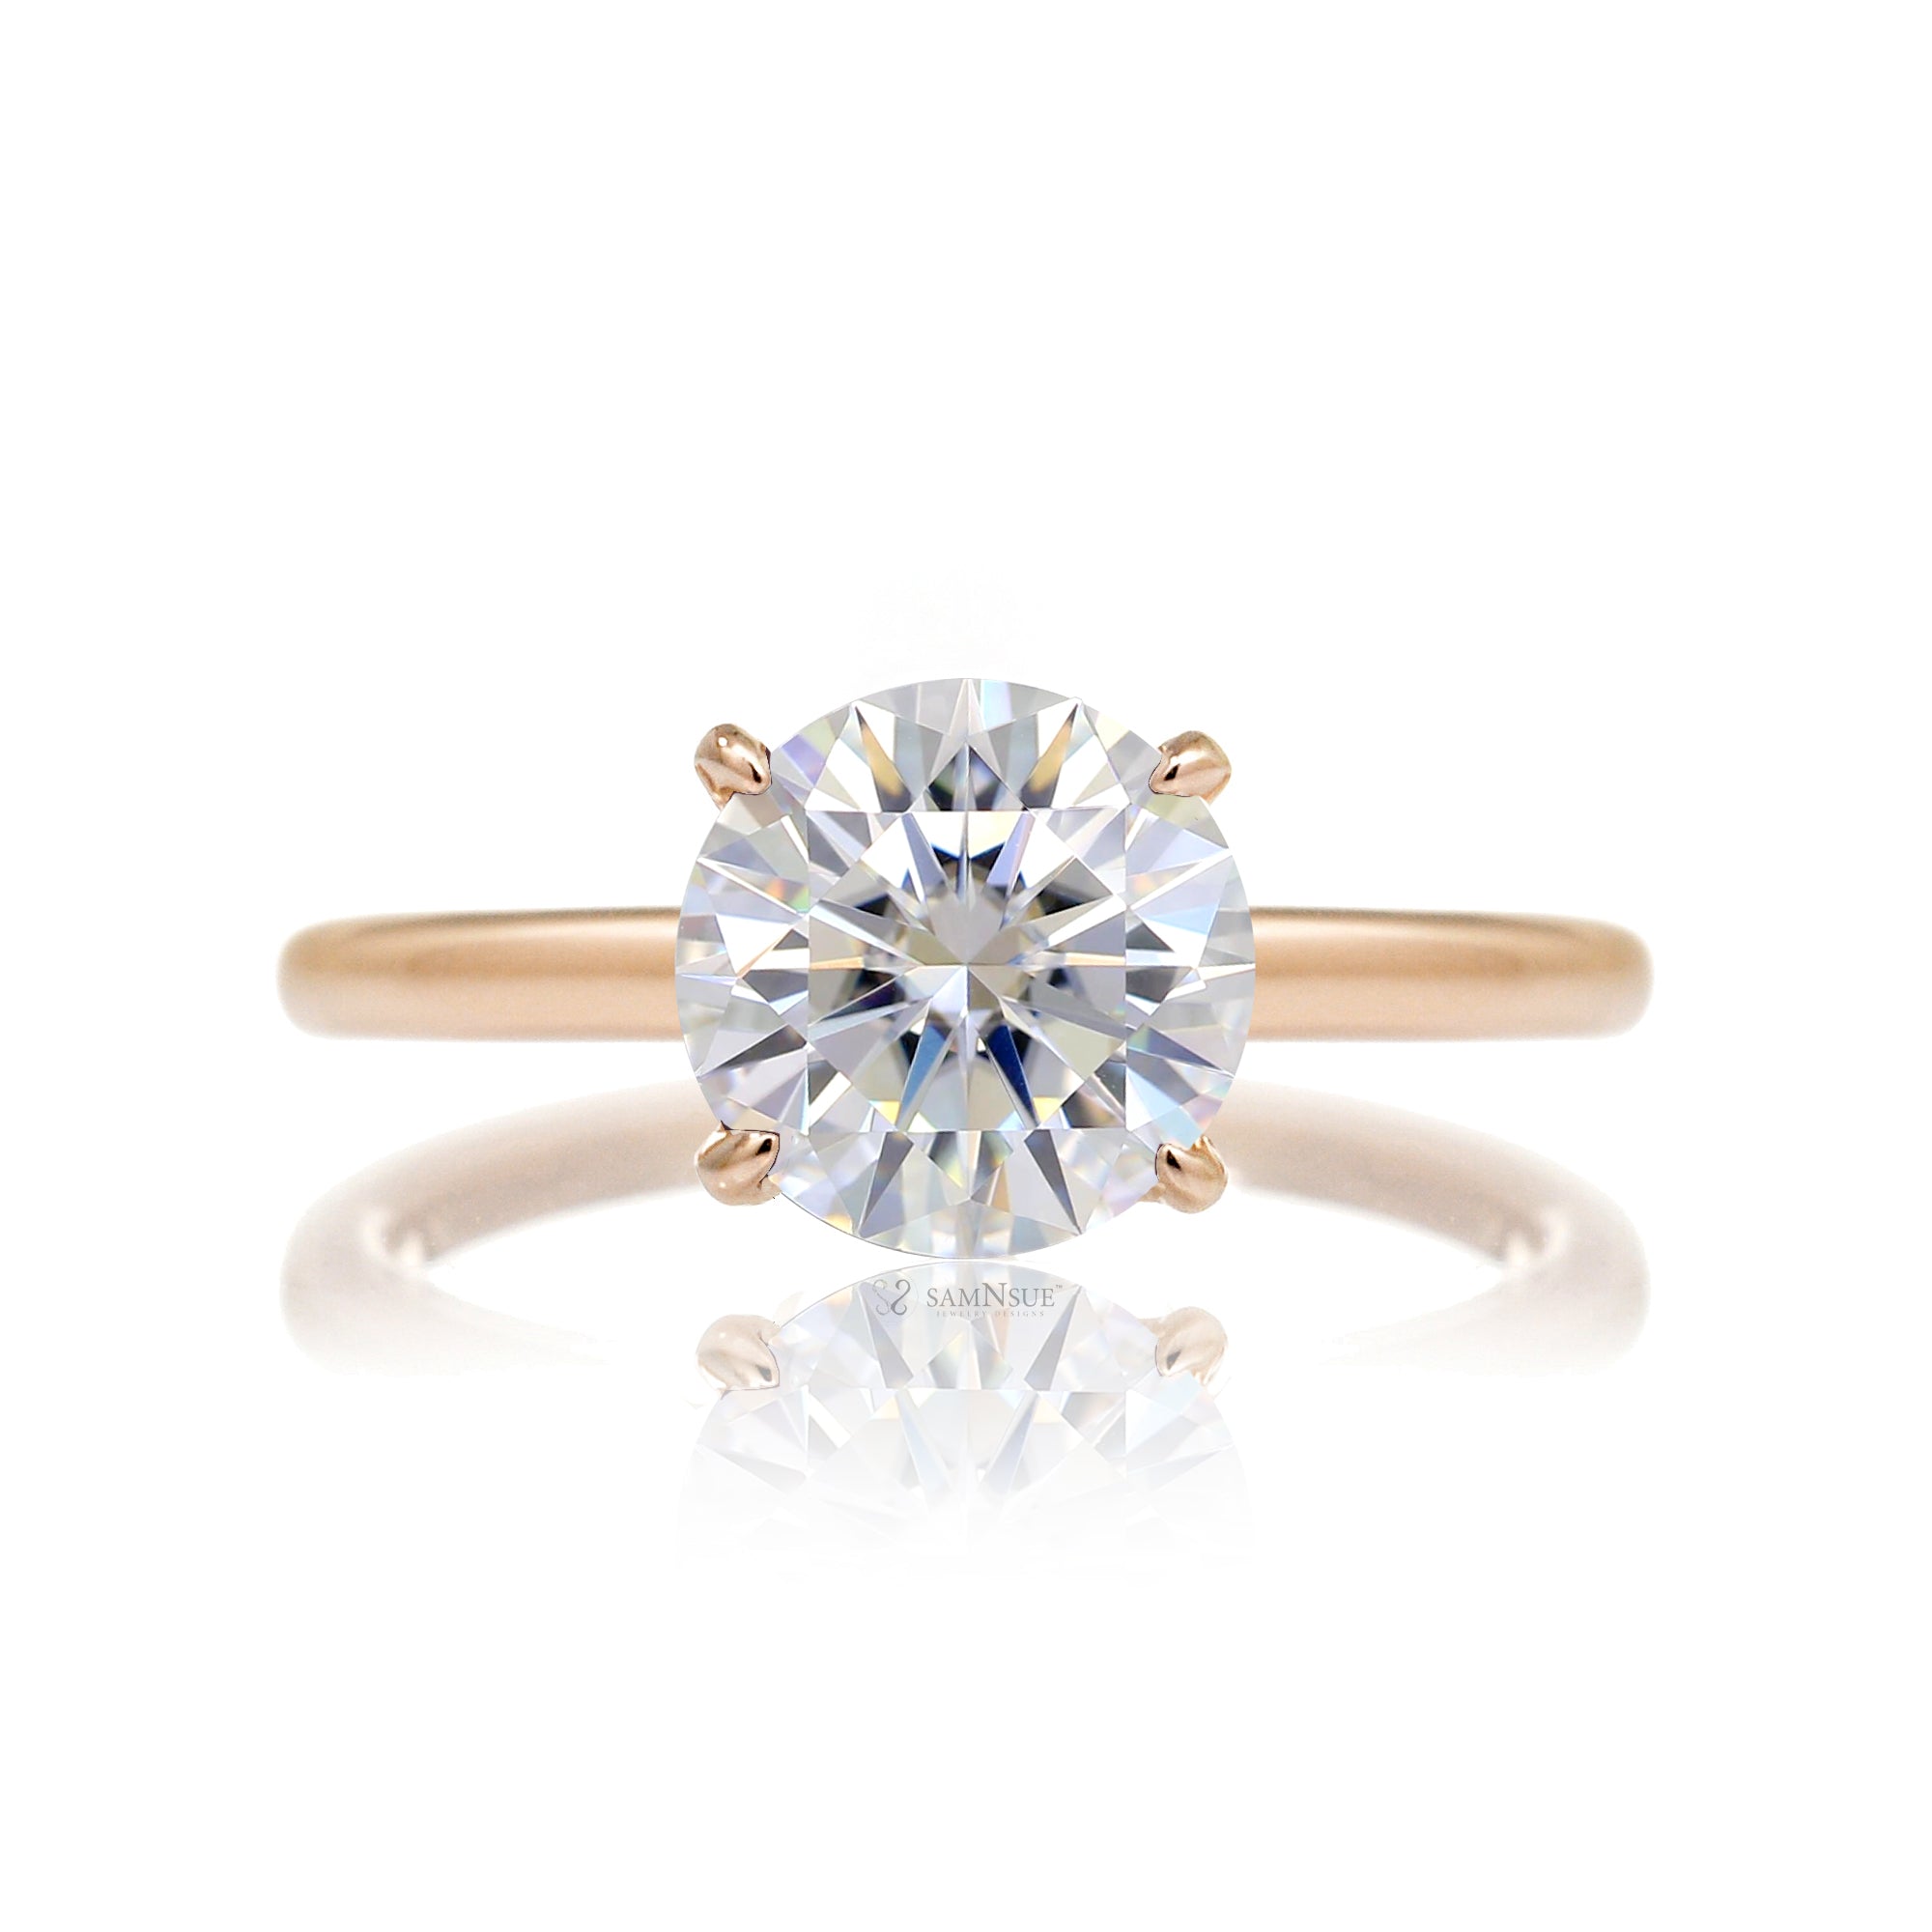 Round cut solitaire diamond engagement ring with a hidden halo and solid polished band in rose gold